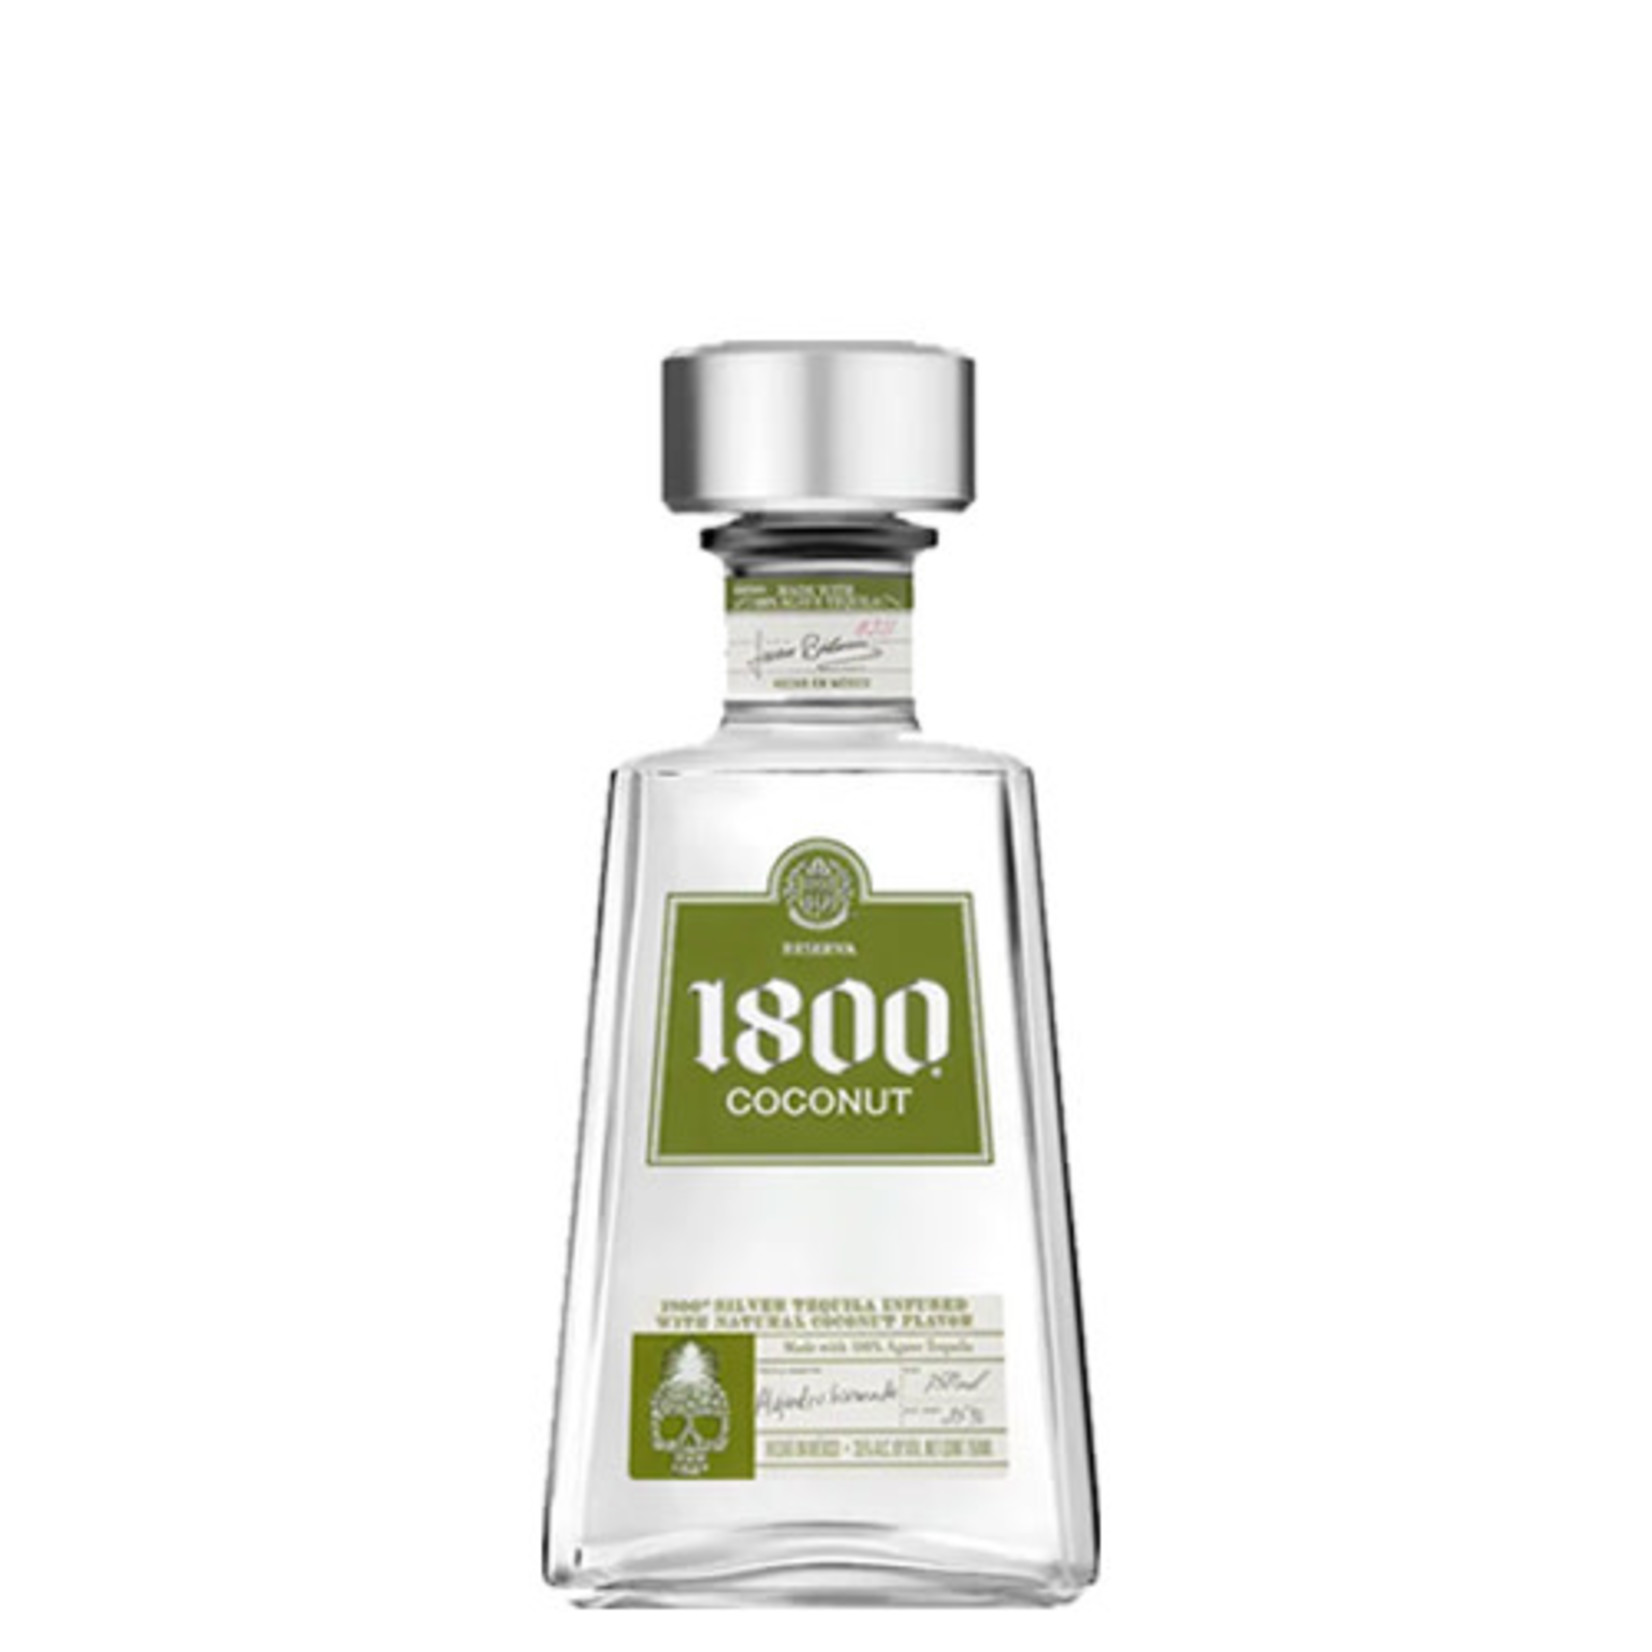 1800 Tequila 1800 Coconut Tequila 70Proof 375ml